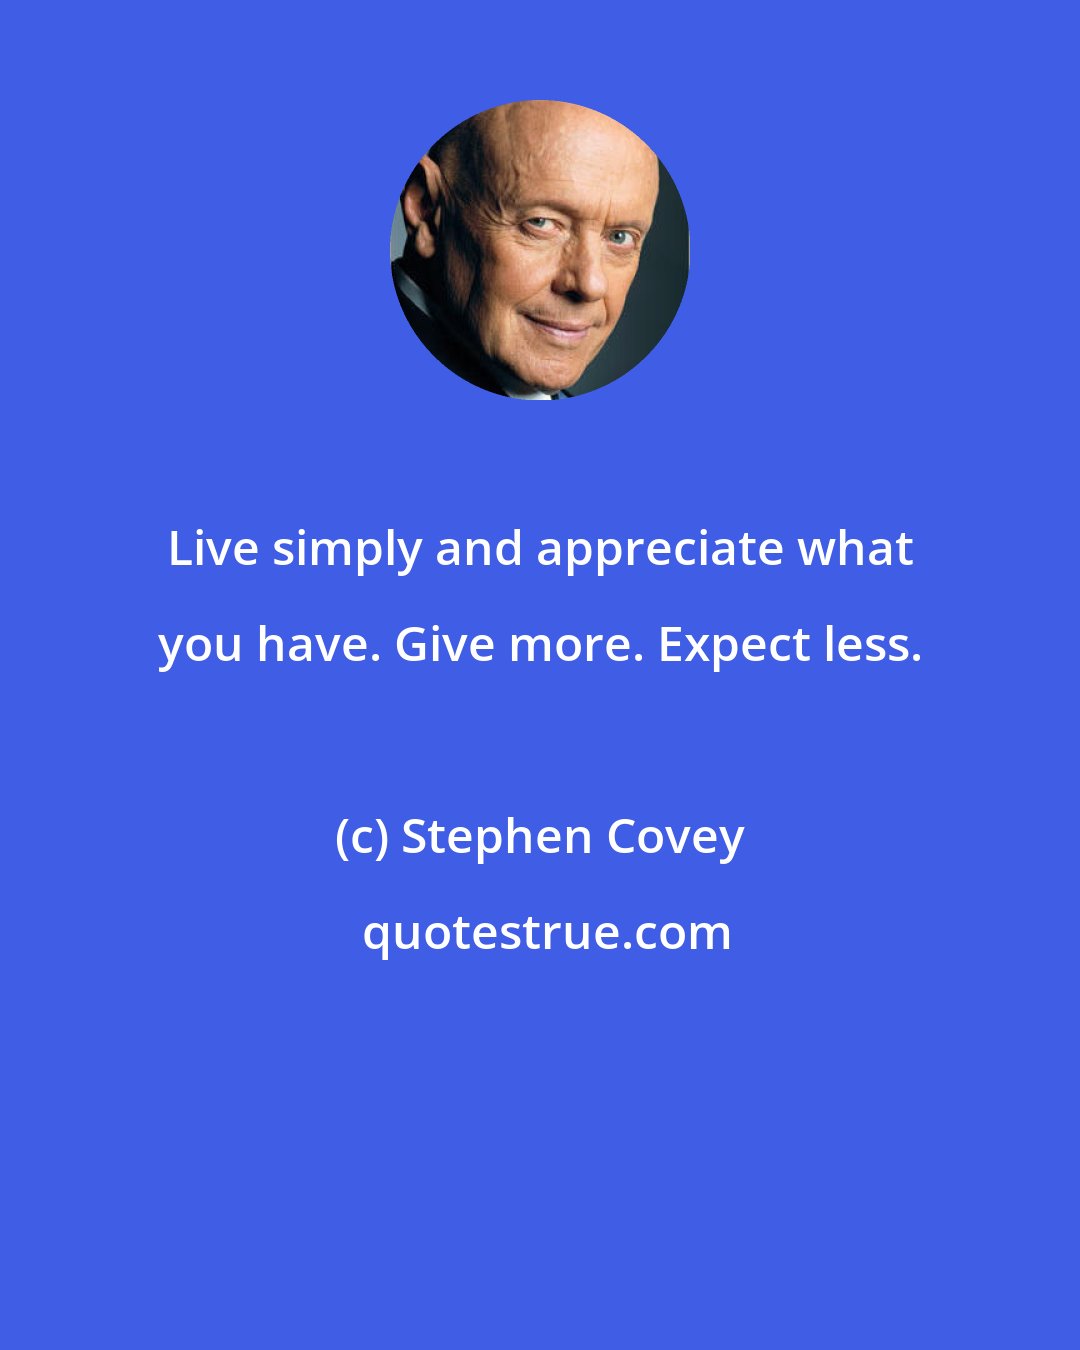 Stephen Covey: Live simply and appreciate what you have. Give more. Expect less.